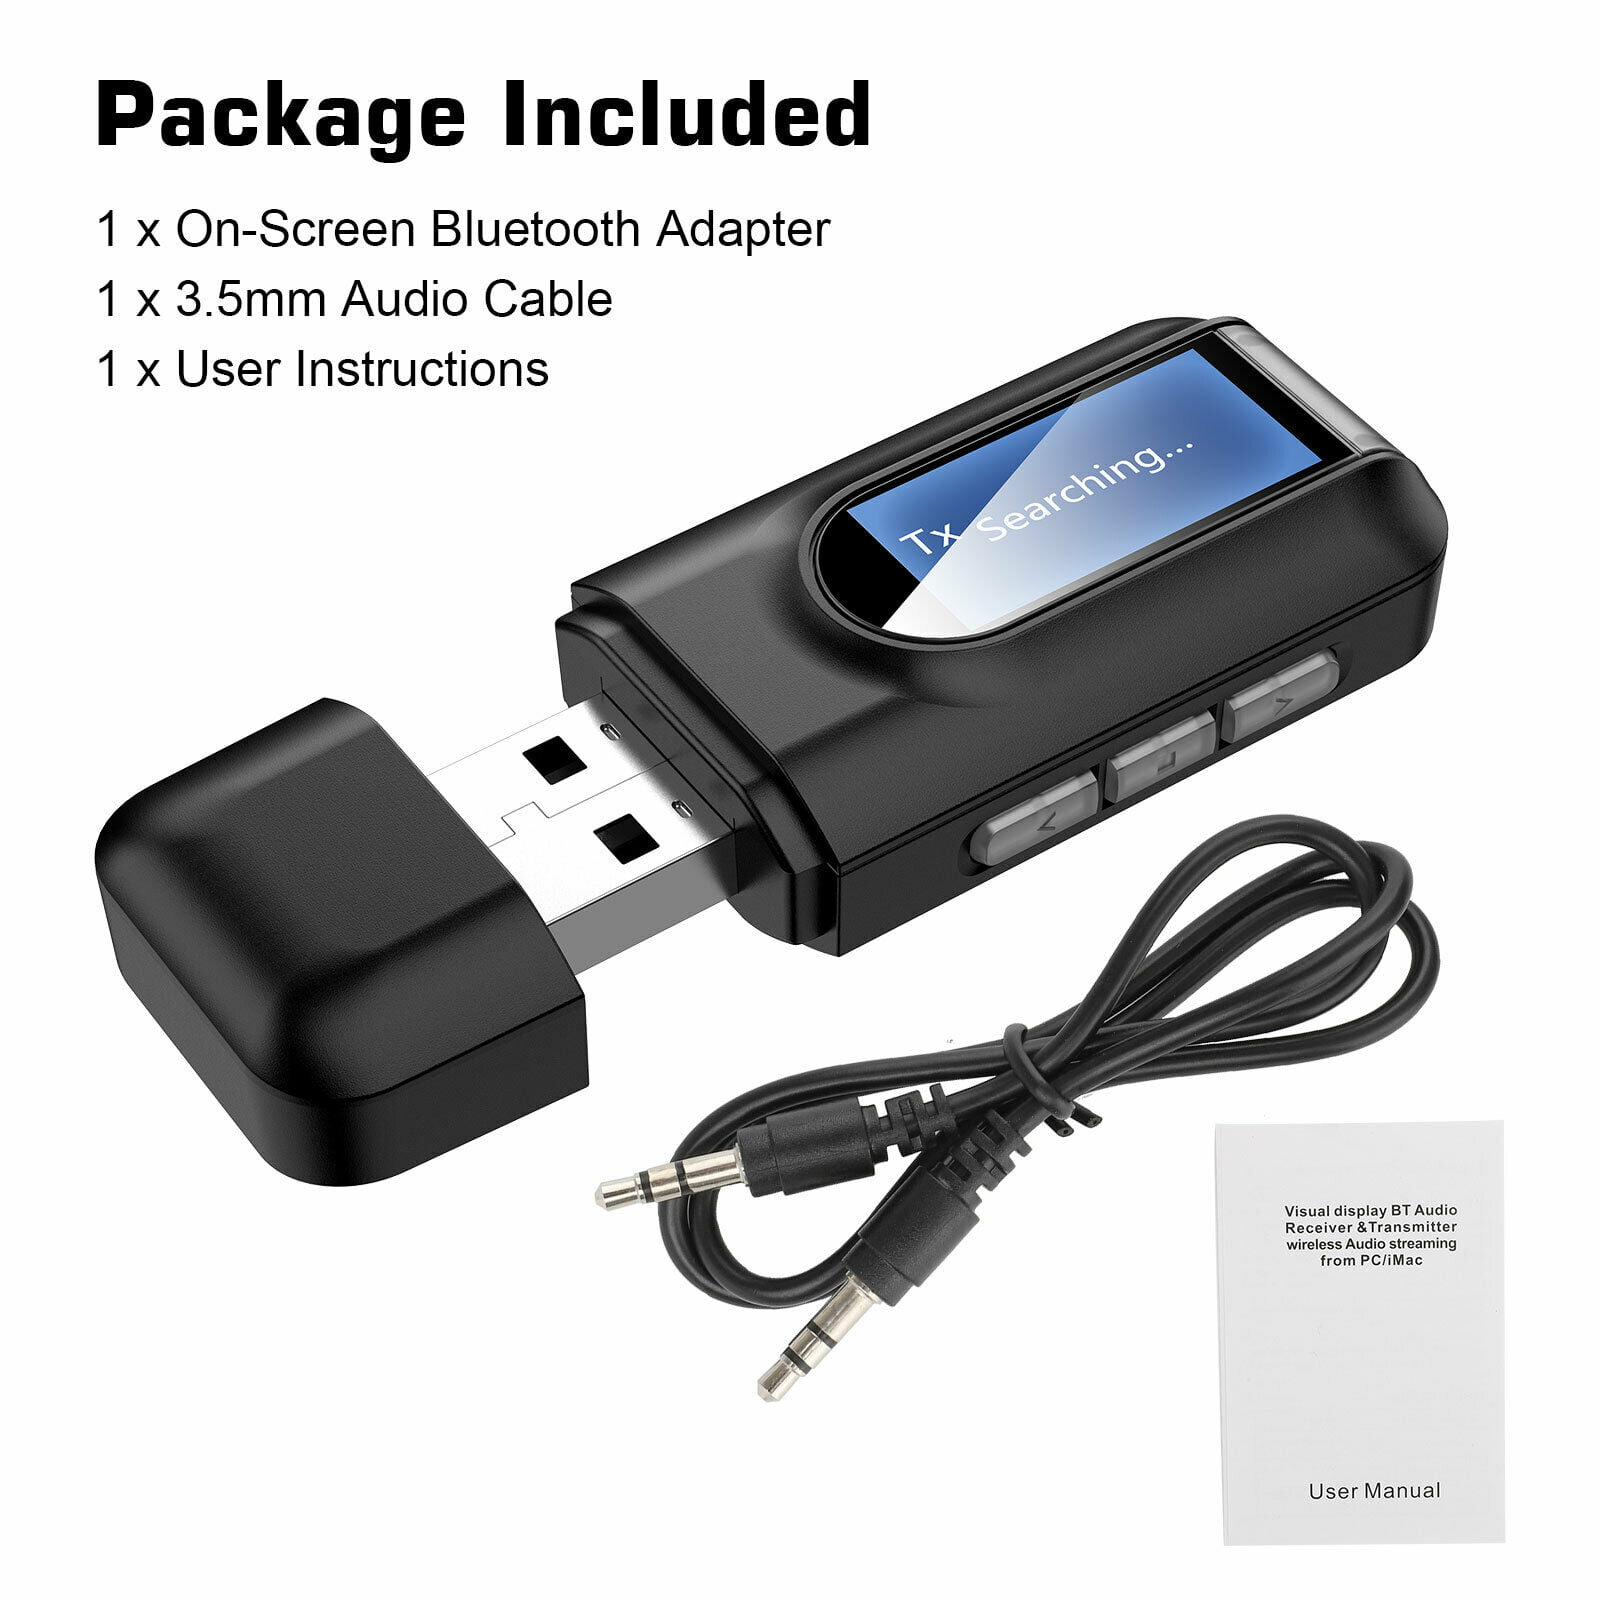 USB Bluetooth 5.0 Audio Transmitter Receiver with LCD Display, 3 in 1 Portable Bluetooth Adapter,3.5MM Wireless Bluetooth Adapter for PC,TV,Wired Speaker,Headphones and Car - Walmart.com